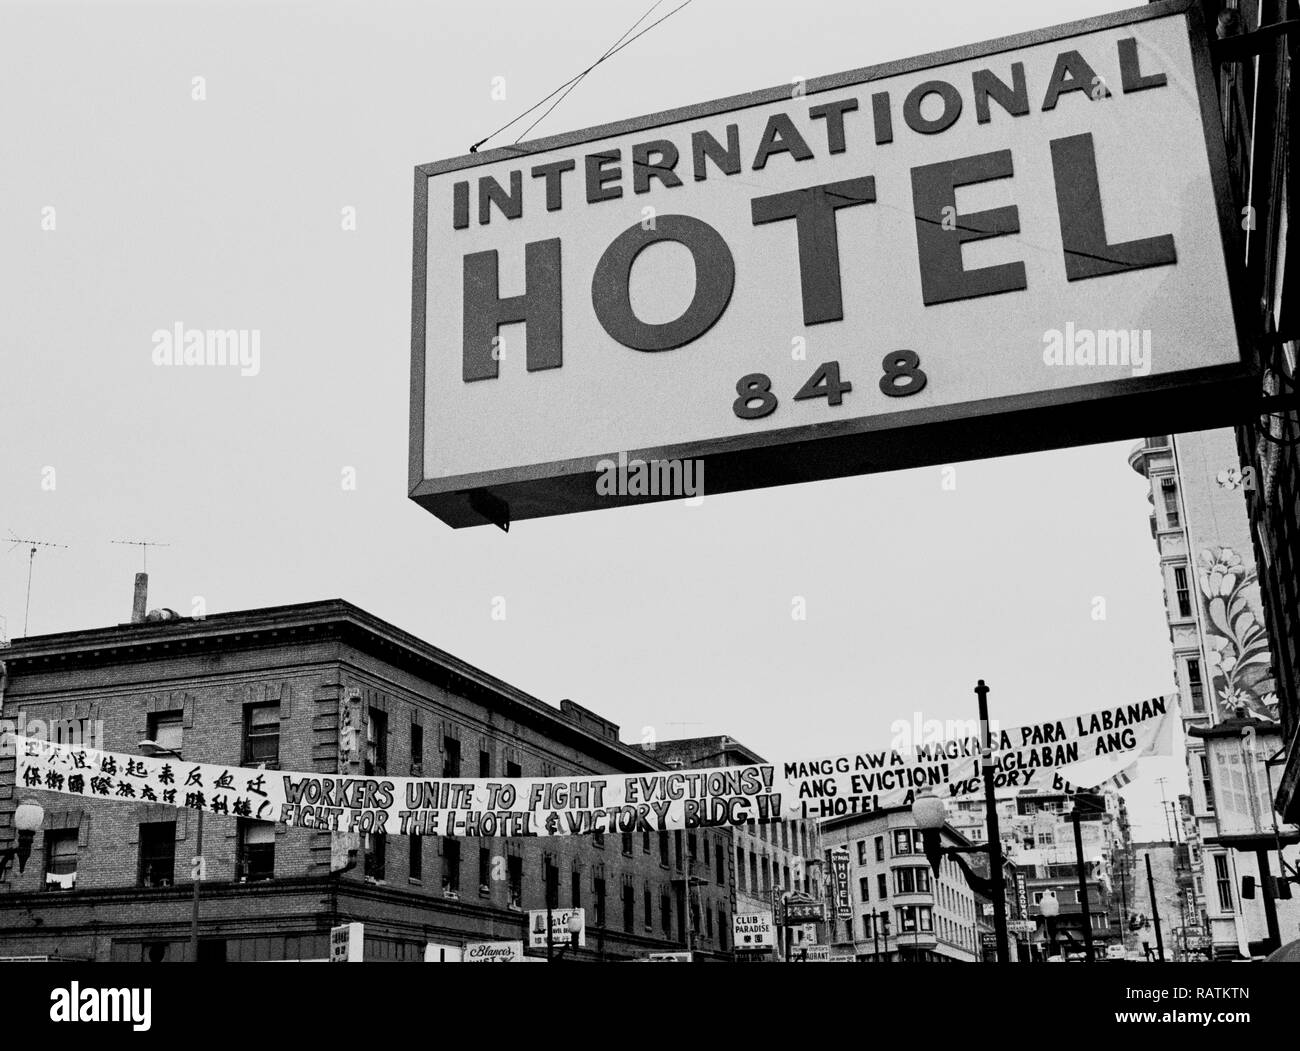 International Hotel banner protesting  pending eviction of low income elderly residents and demolition of  the International Hotel  building on Kearny Street in San Francisco, California. 08/03/1976 Stock Photo